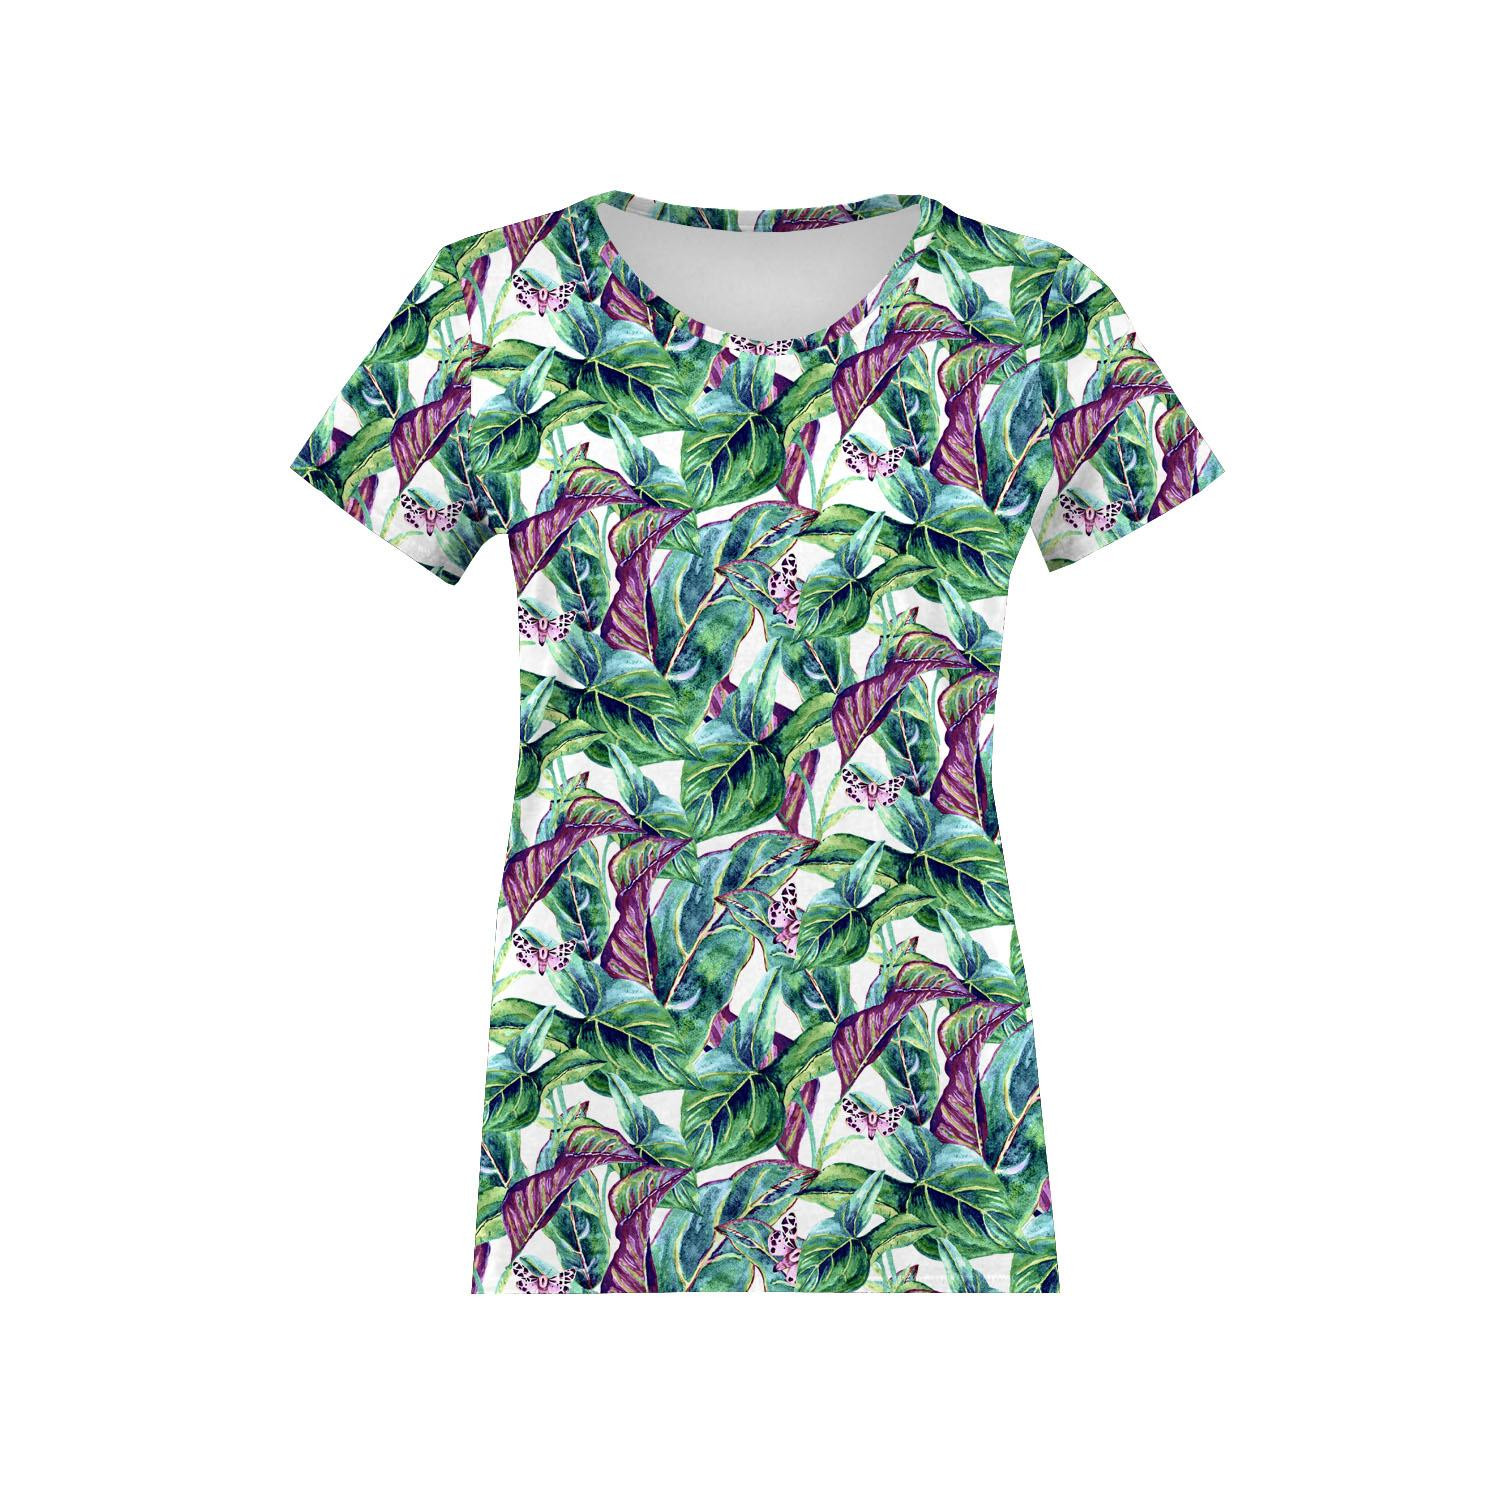 WOMEN’S T-SHIRT - MINI LEAVES AND INSECTS PAT. 1 (TROPICAL NATURE) / white - single jersey